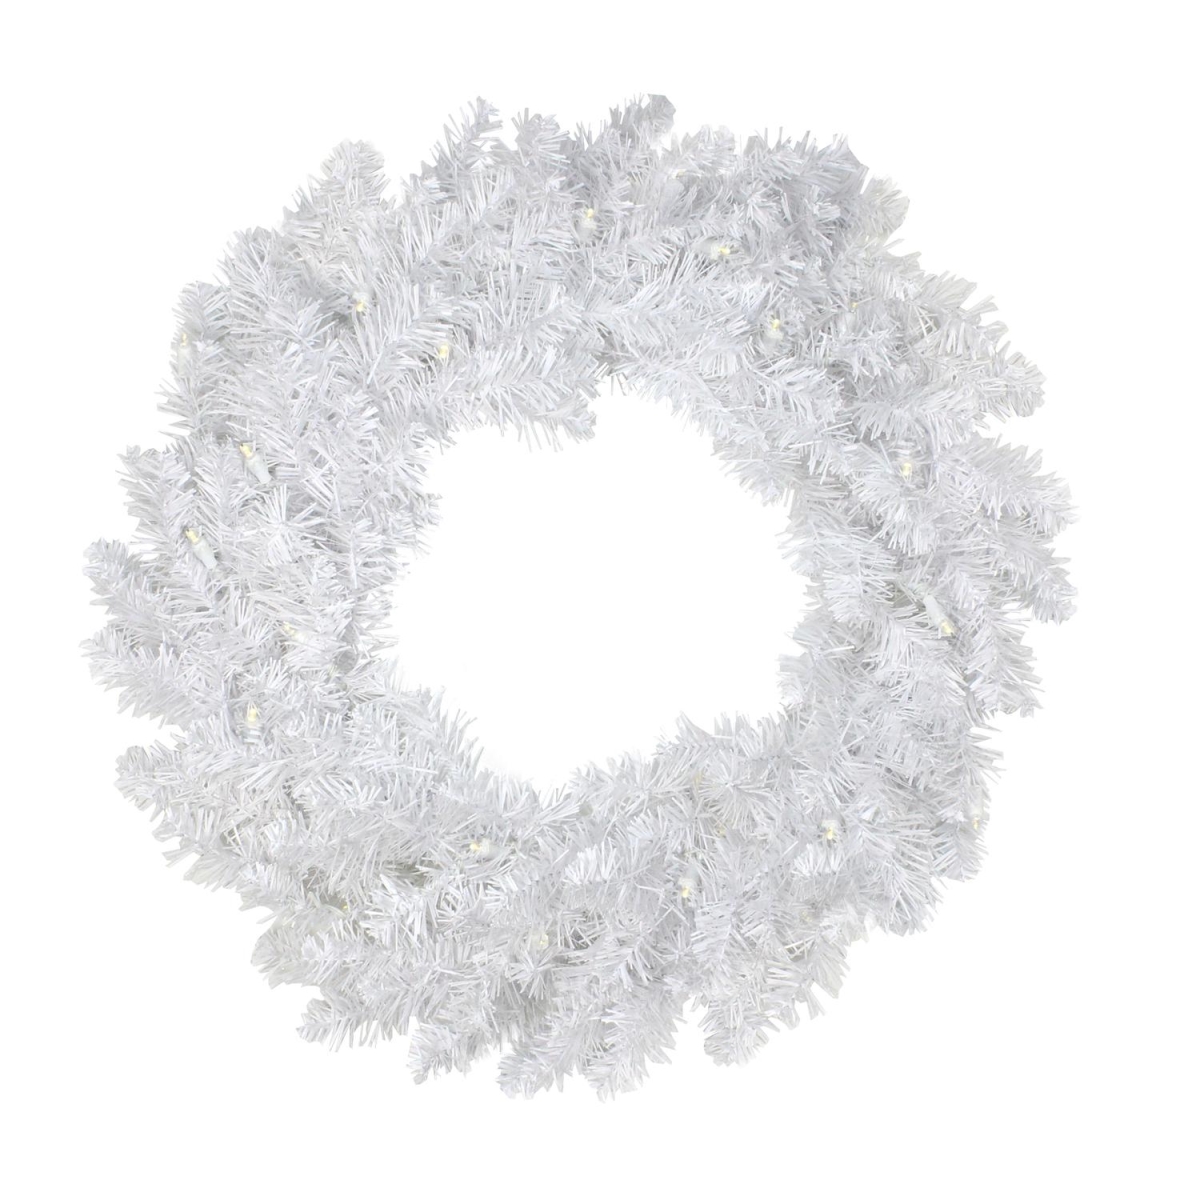 Northlight 32913248 24 in. Pre-Lit LED White Artificial Christmas Wreath - Clear Lights